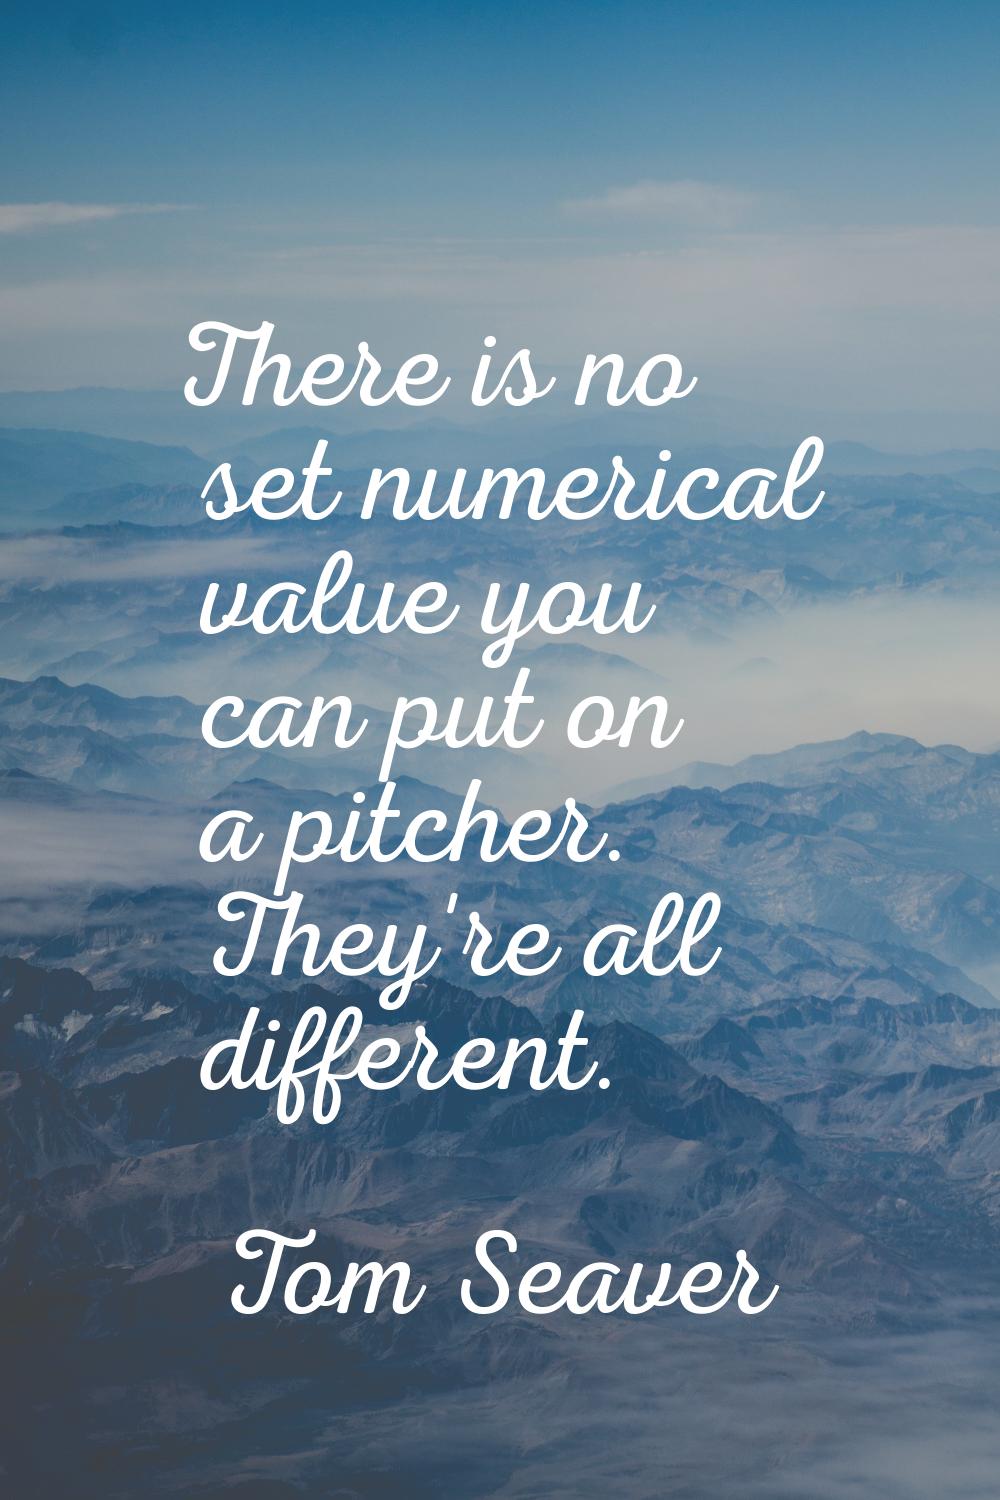 There is no set numerical value you can put on a pitcher. They're all different.